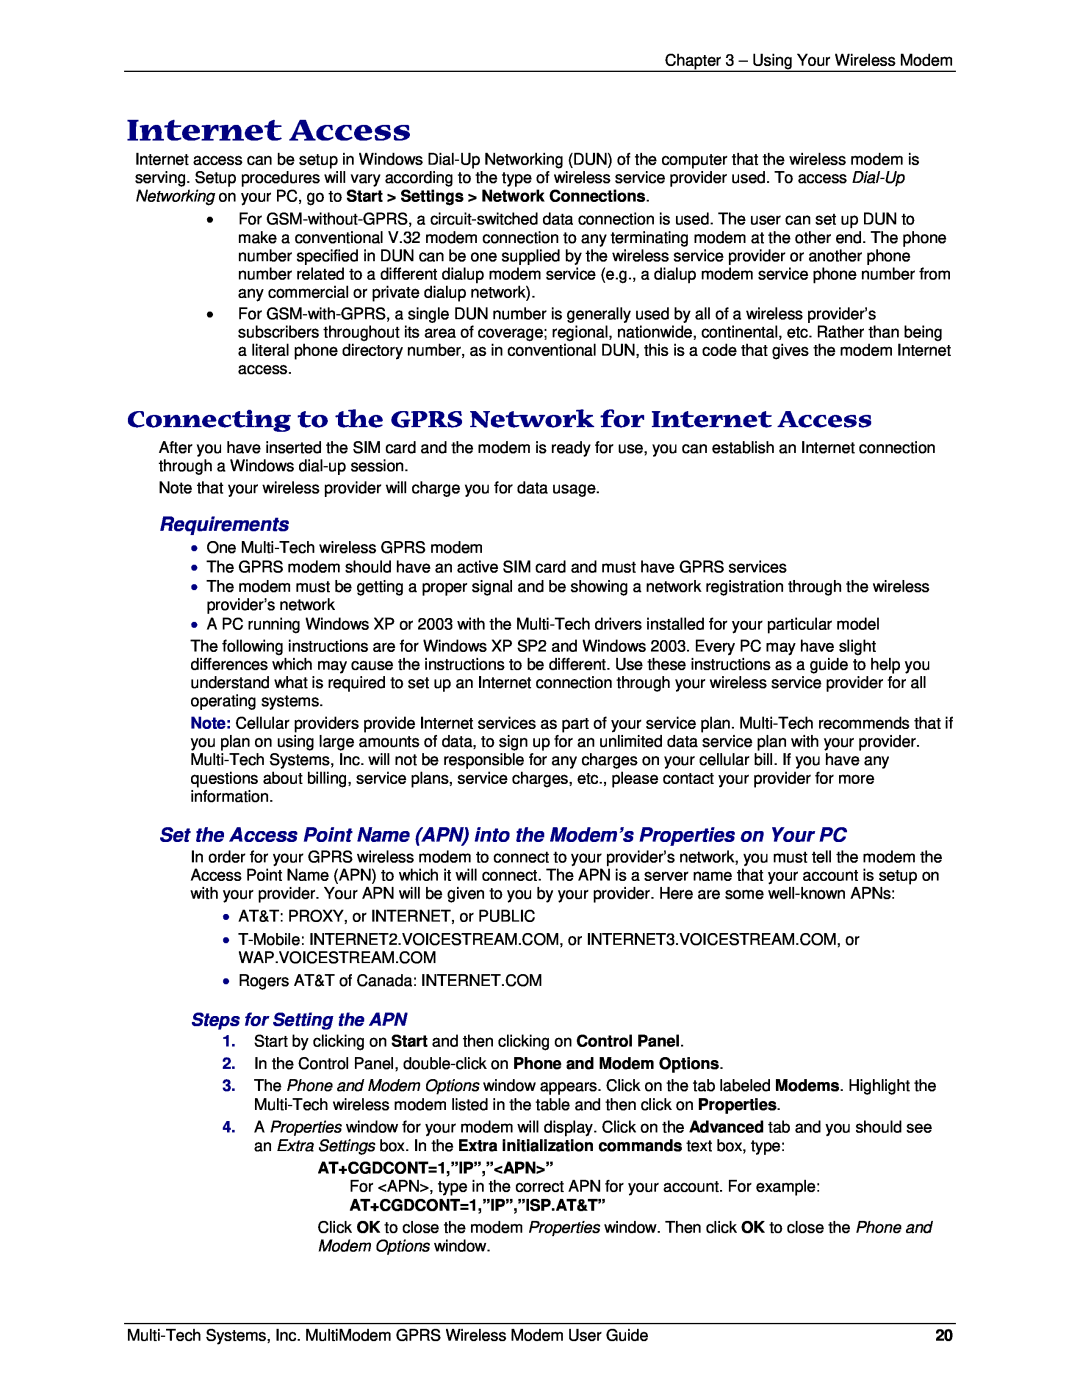 Multi-Tech Systems MTCBA-G-F4 manual Connecting to the GPRS Network for Internet Access, AT+CGDCONT=1,”IP”,”APN” 